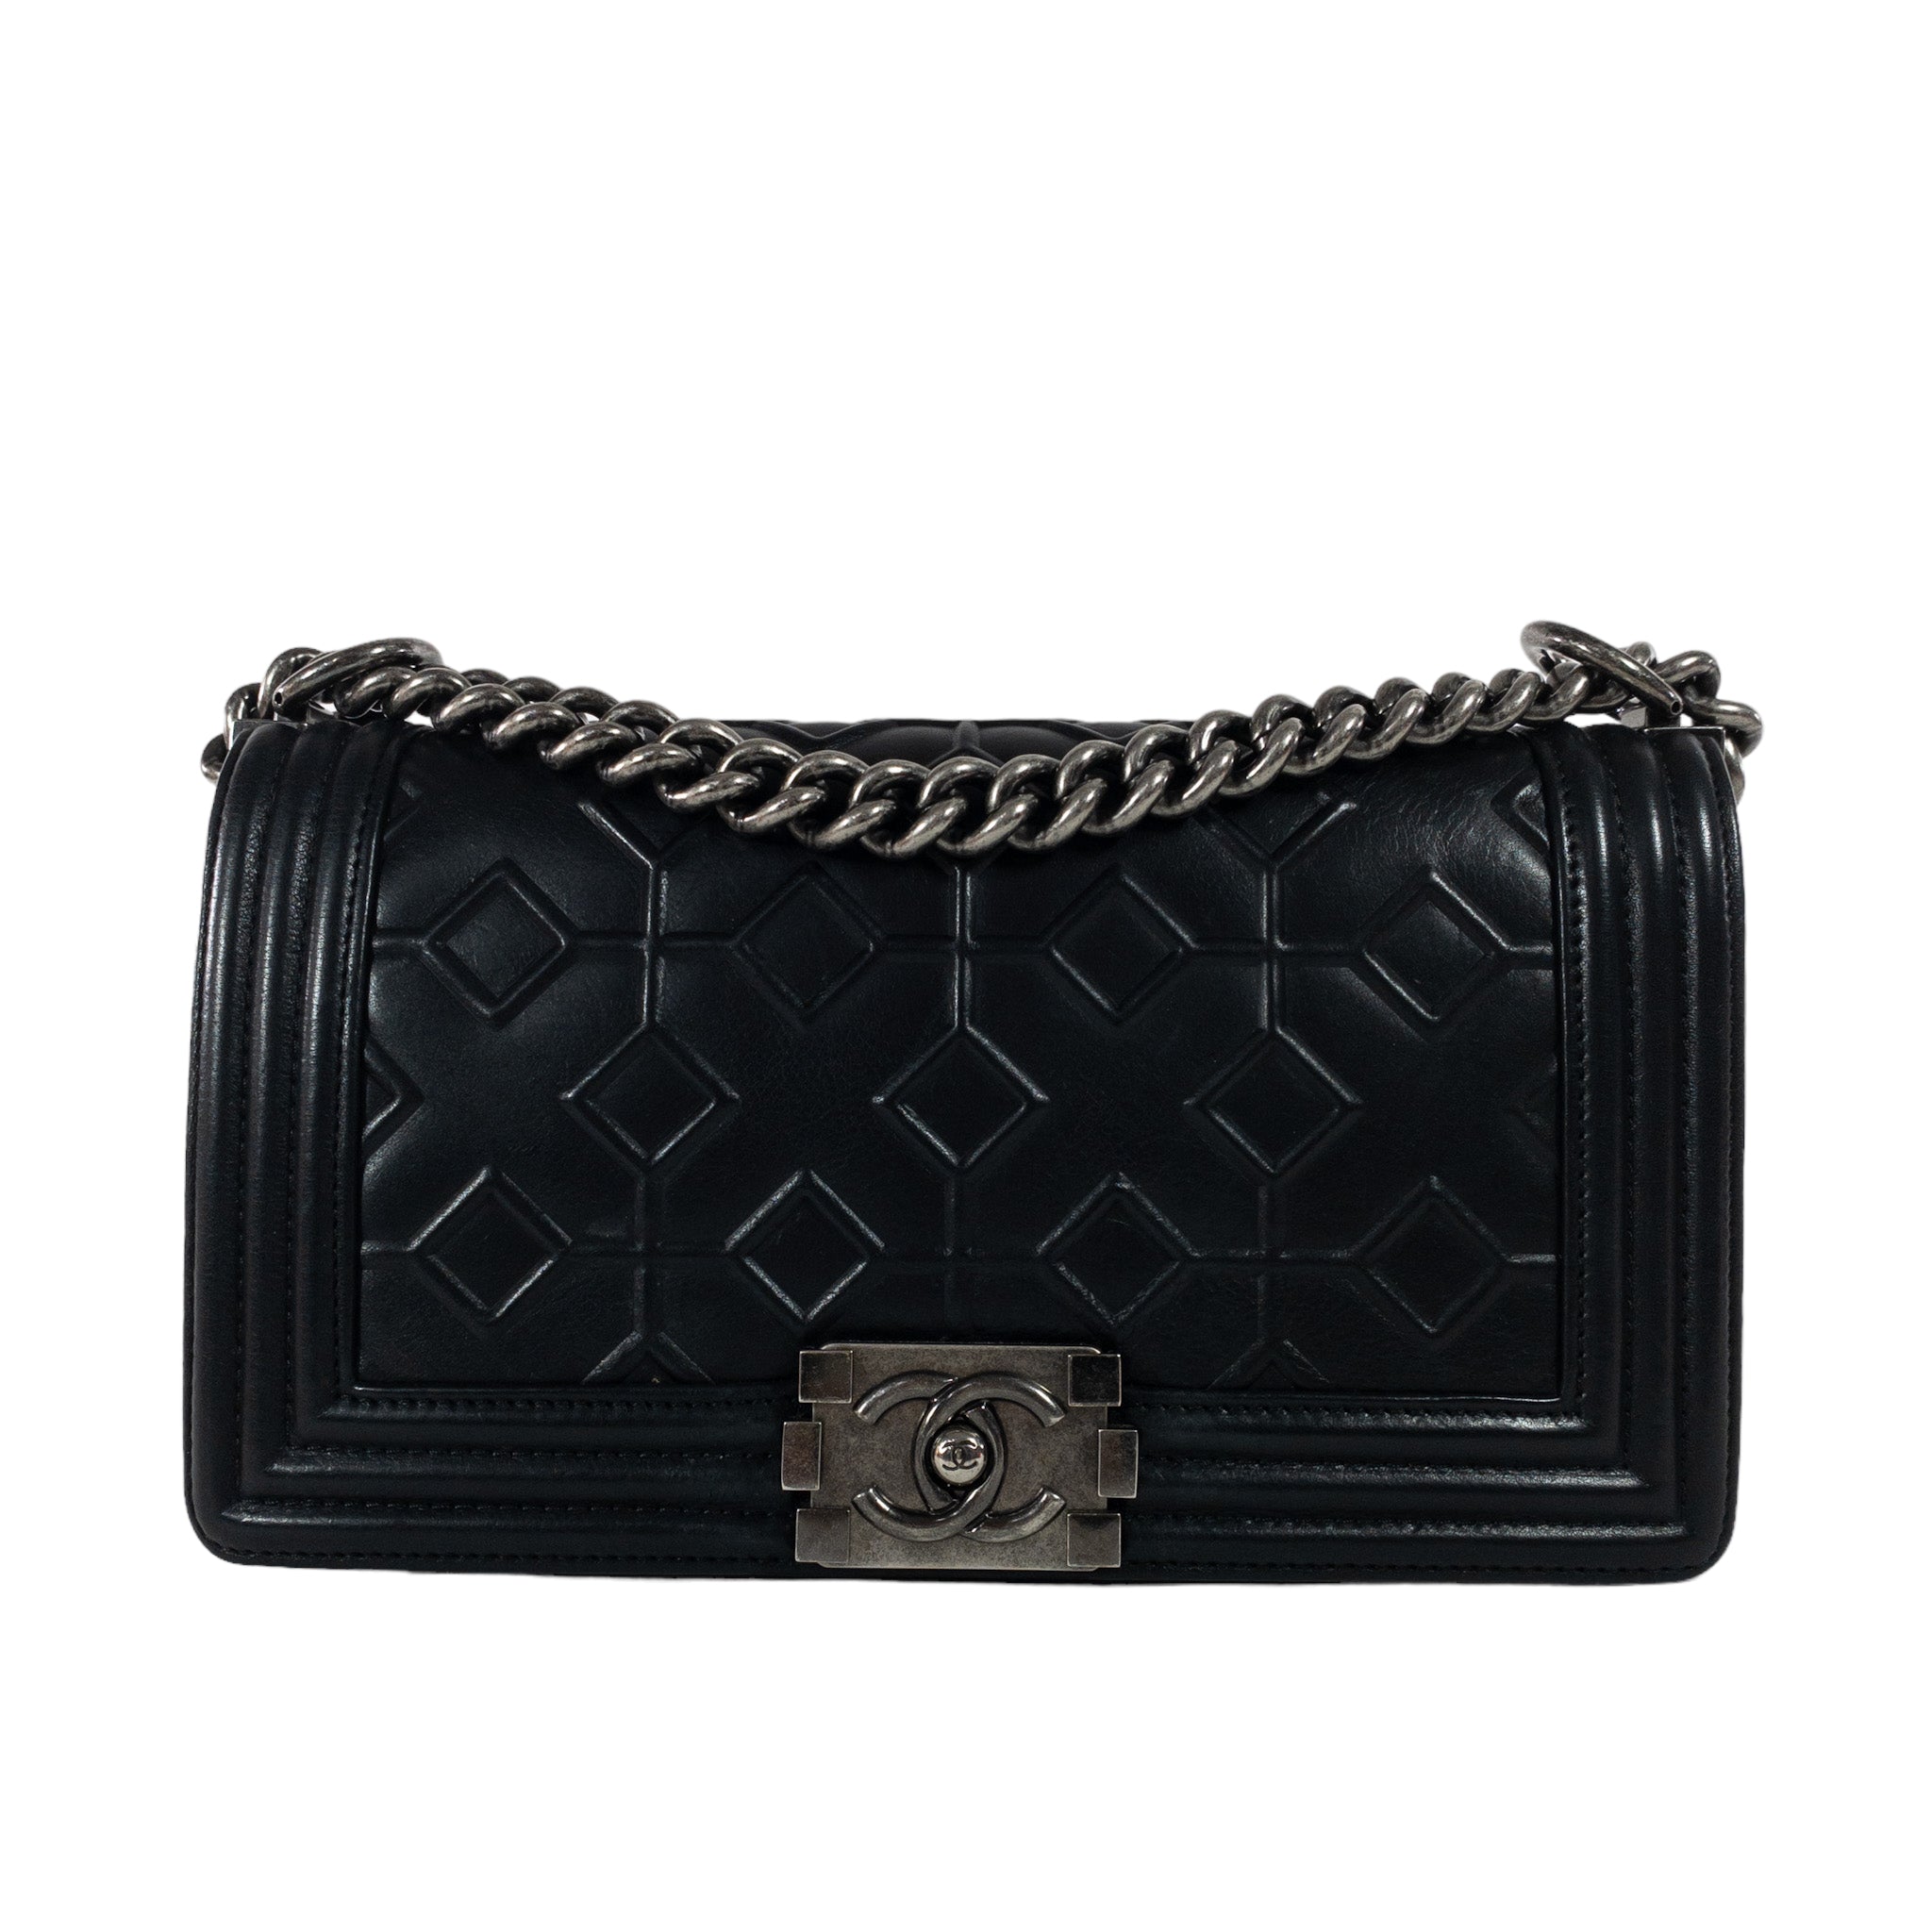 Chanel Black Arabesque Embossed Medium Boy Bag RHW – Consign of the Times ™